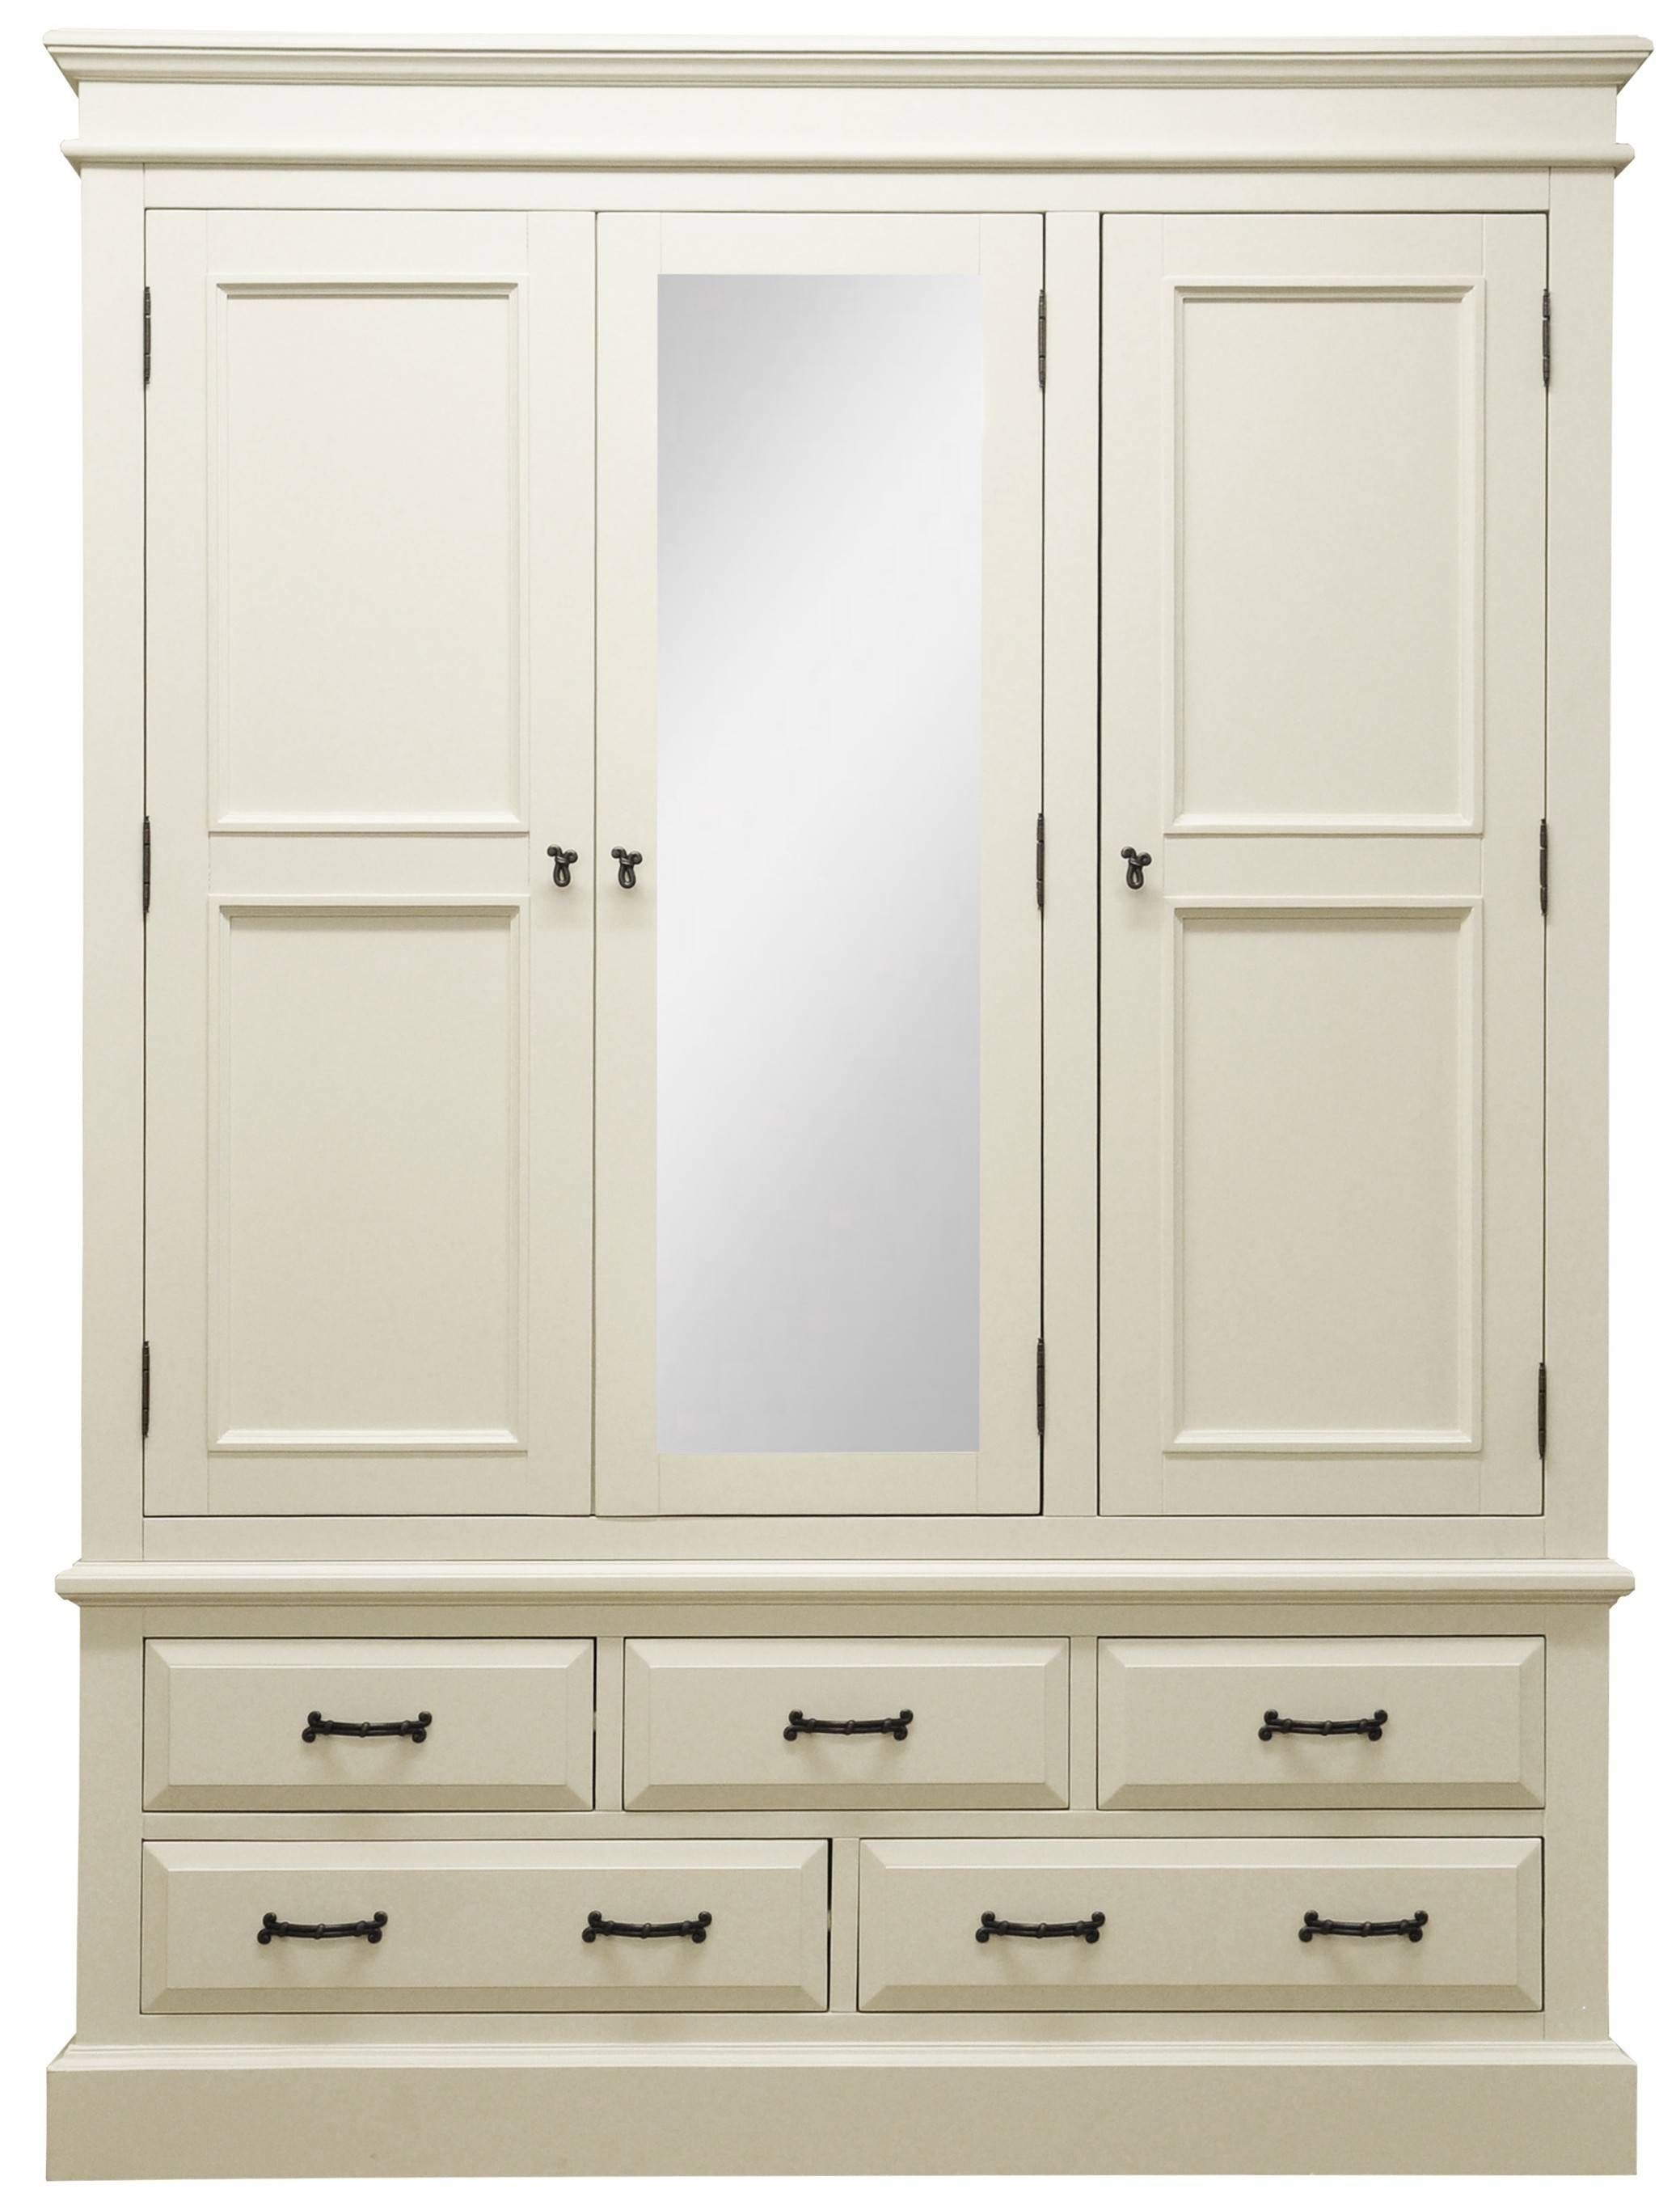 Wardrobe Closet White Calegion Furniture Remarkable Free Standing Inside White Wooden Wardrobes (View 5 of 15)